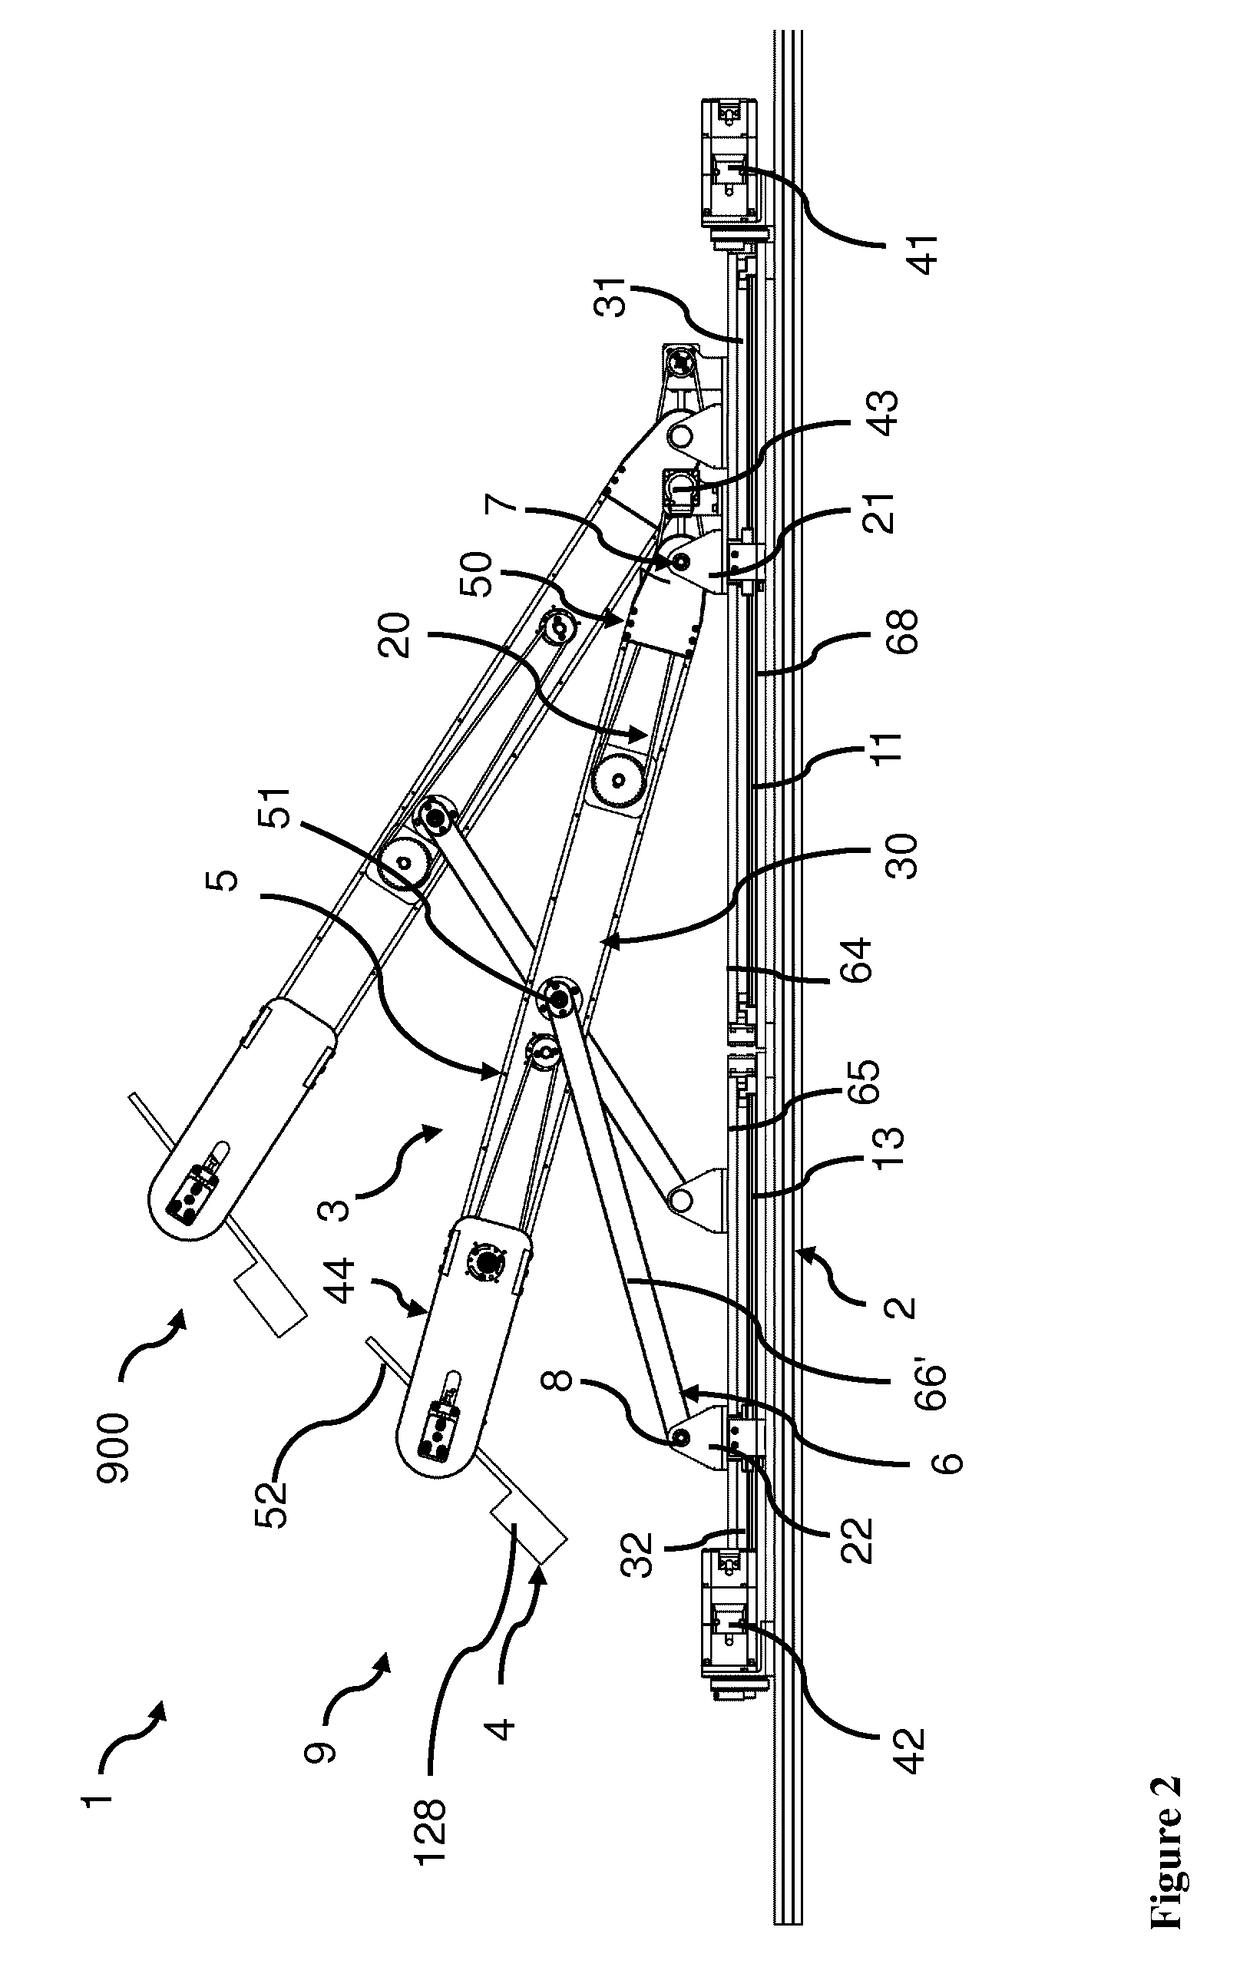 Systems, devices and methods for exercising the lower limbs